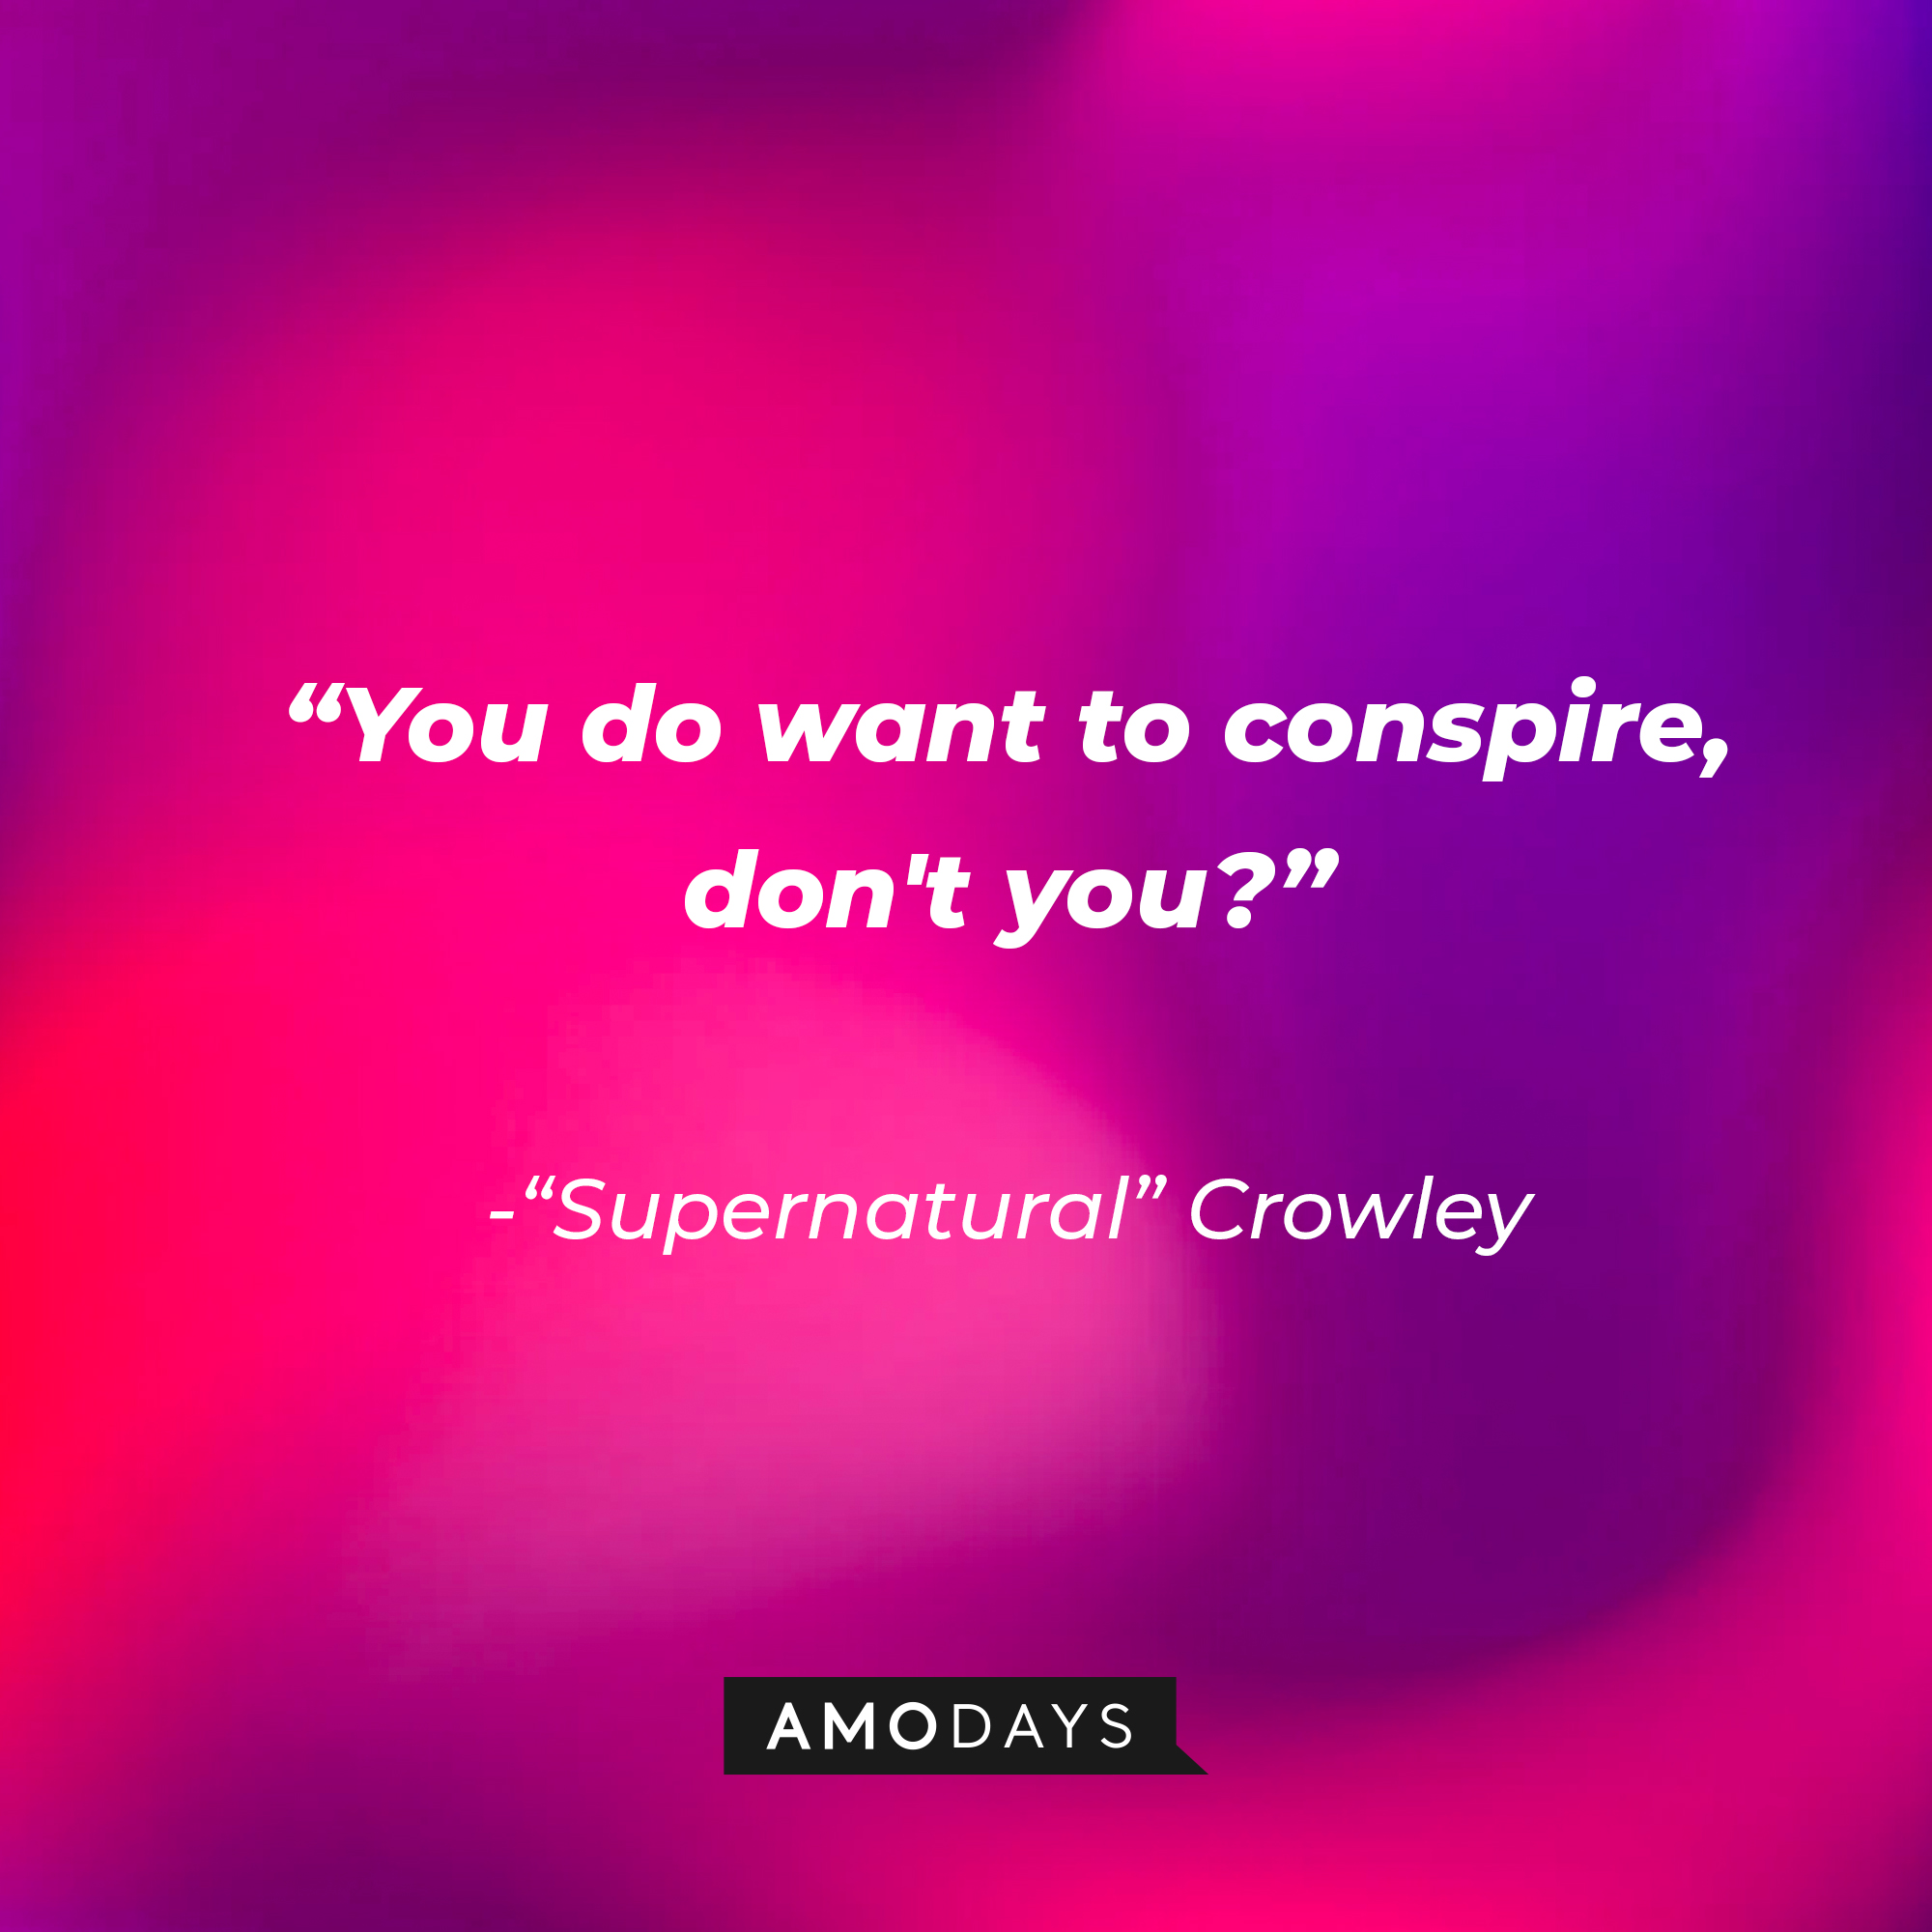 "Supernatural" Crowley's quote: "You do want to conspire, don't you?" | Source: AmoDays